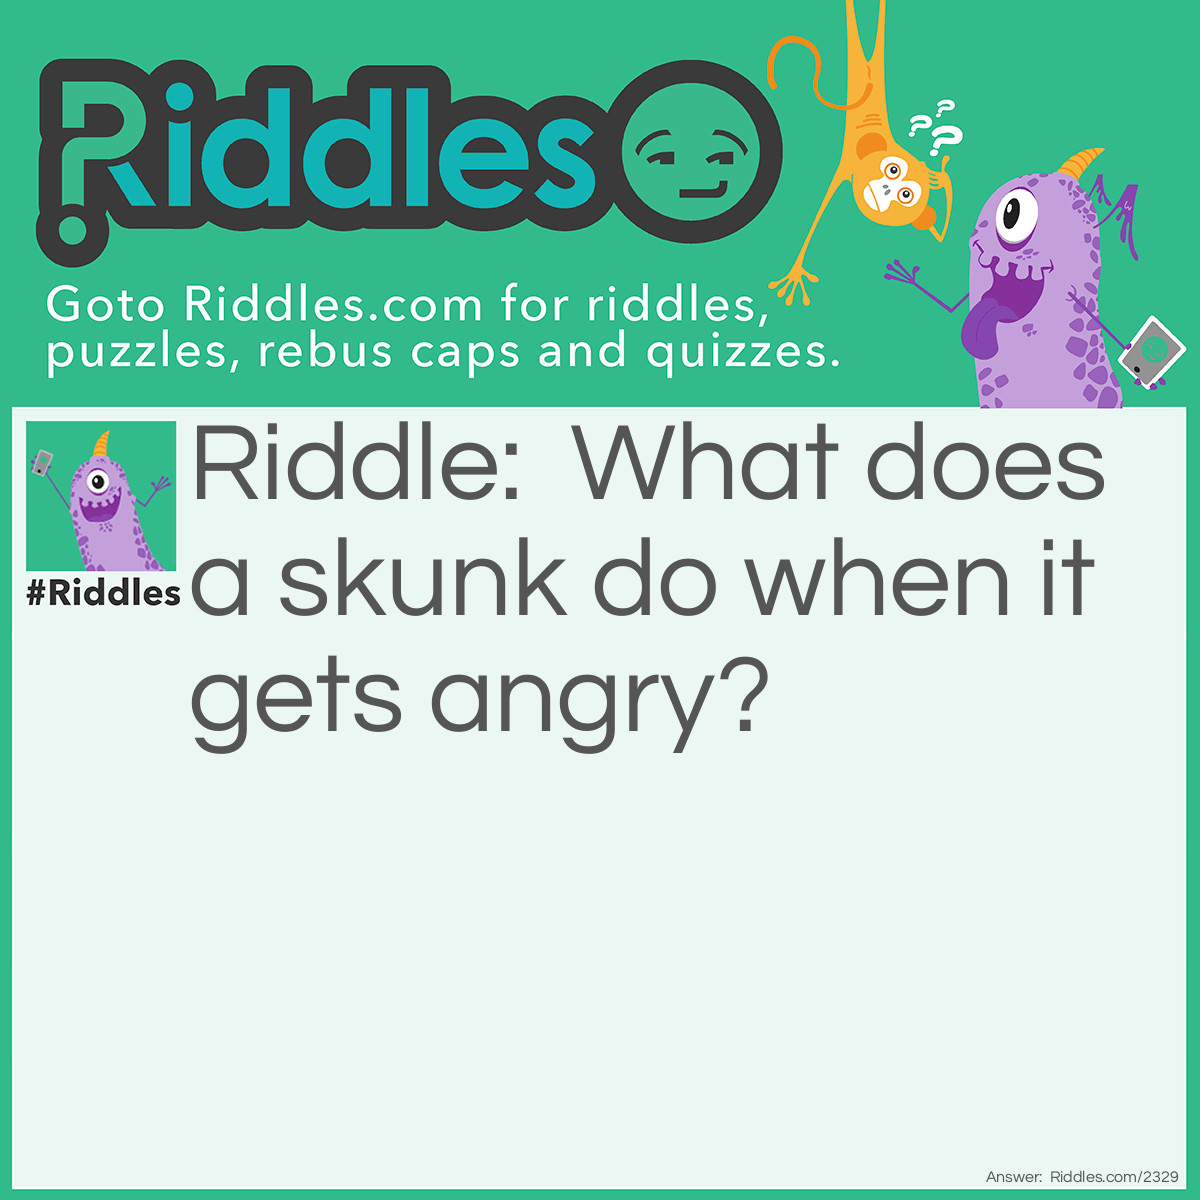 Riddle: What does a skunk do when it gets angry? Answer: It raises a stink.